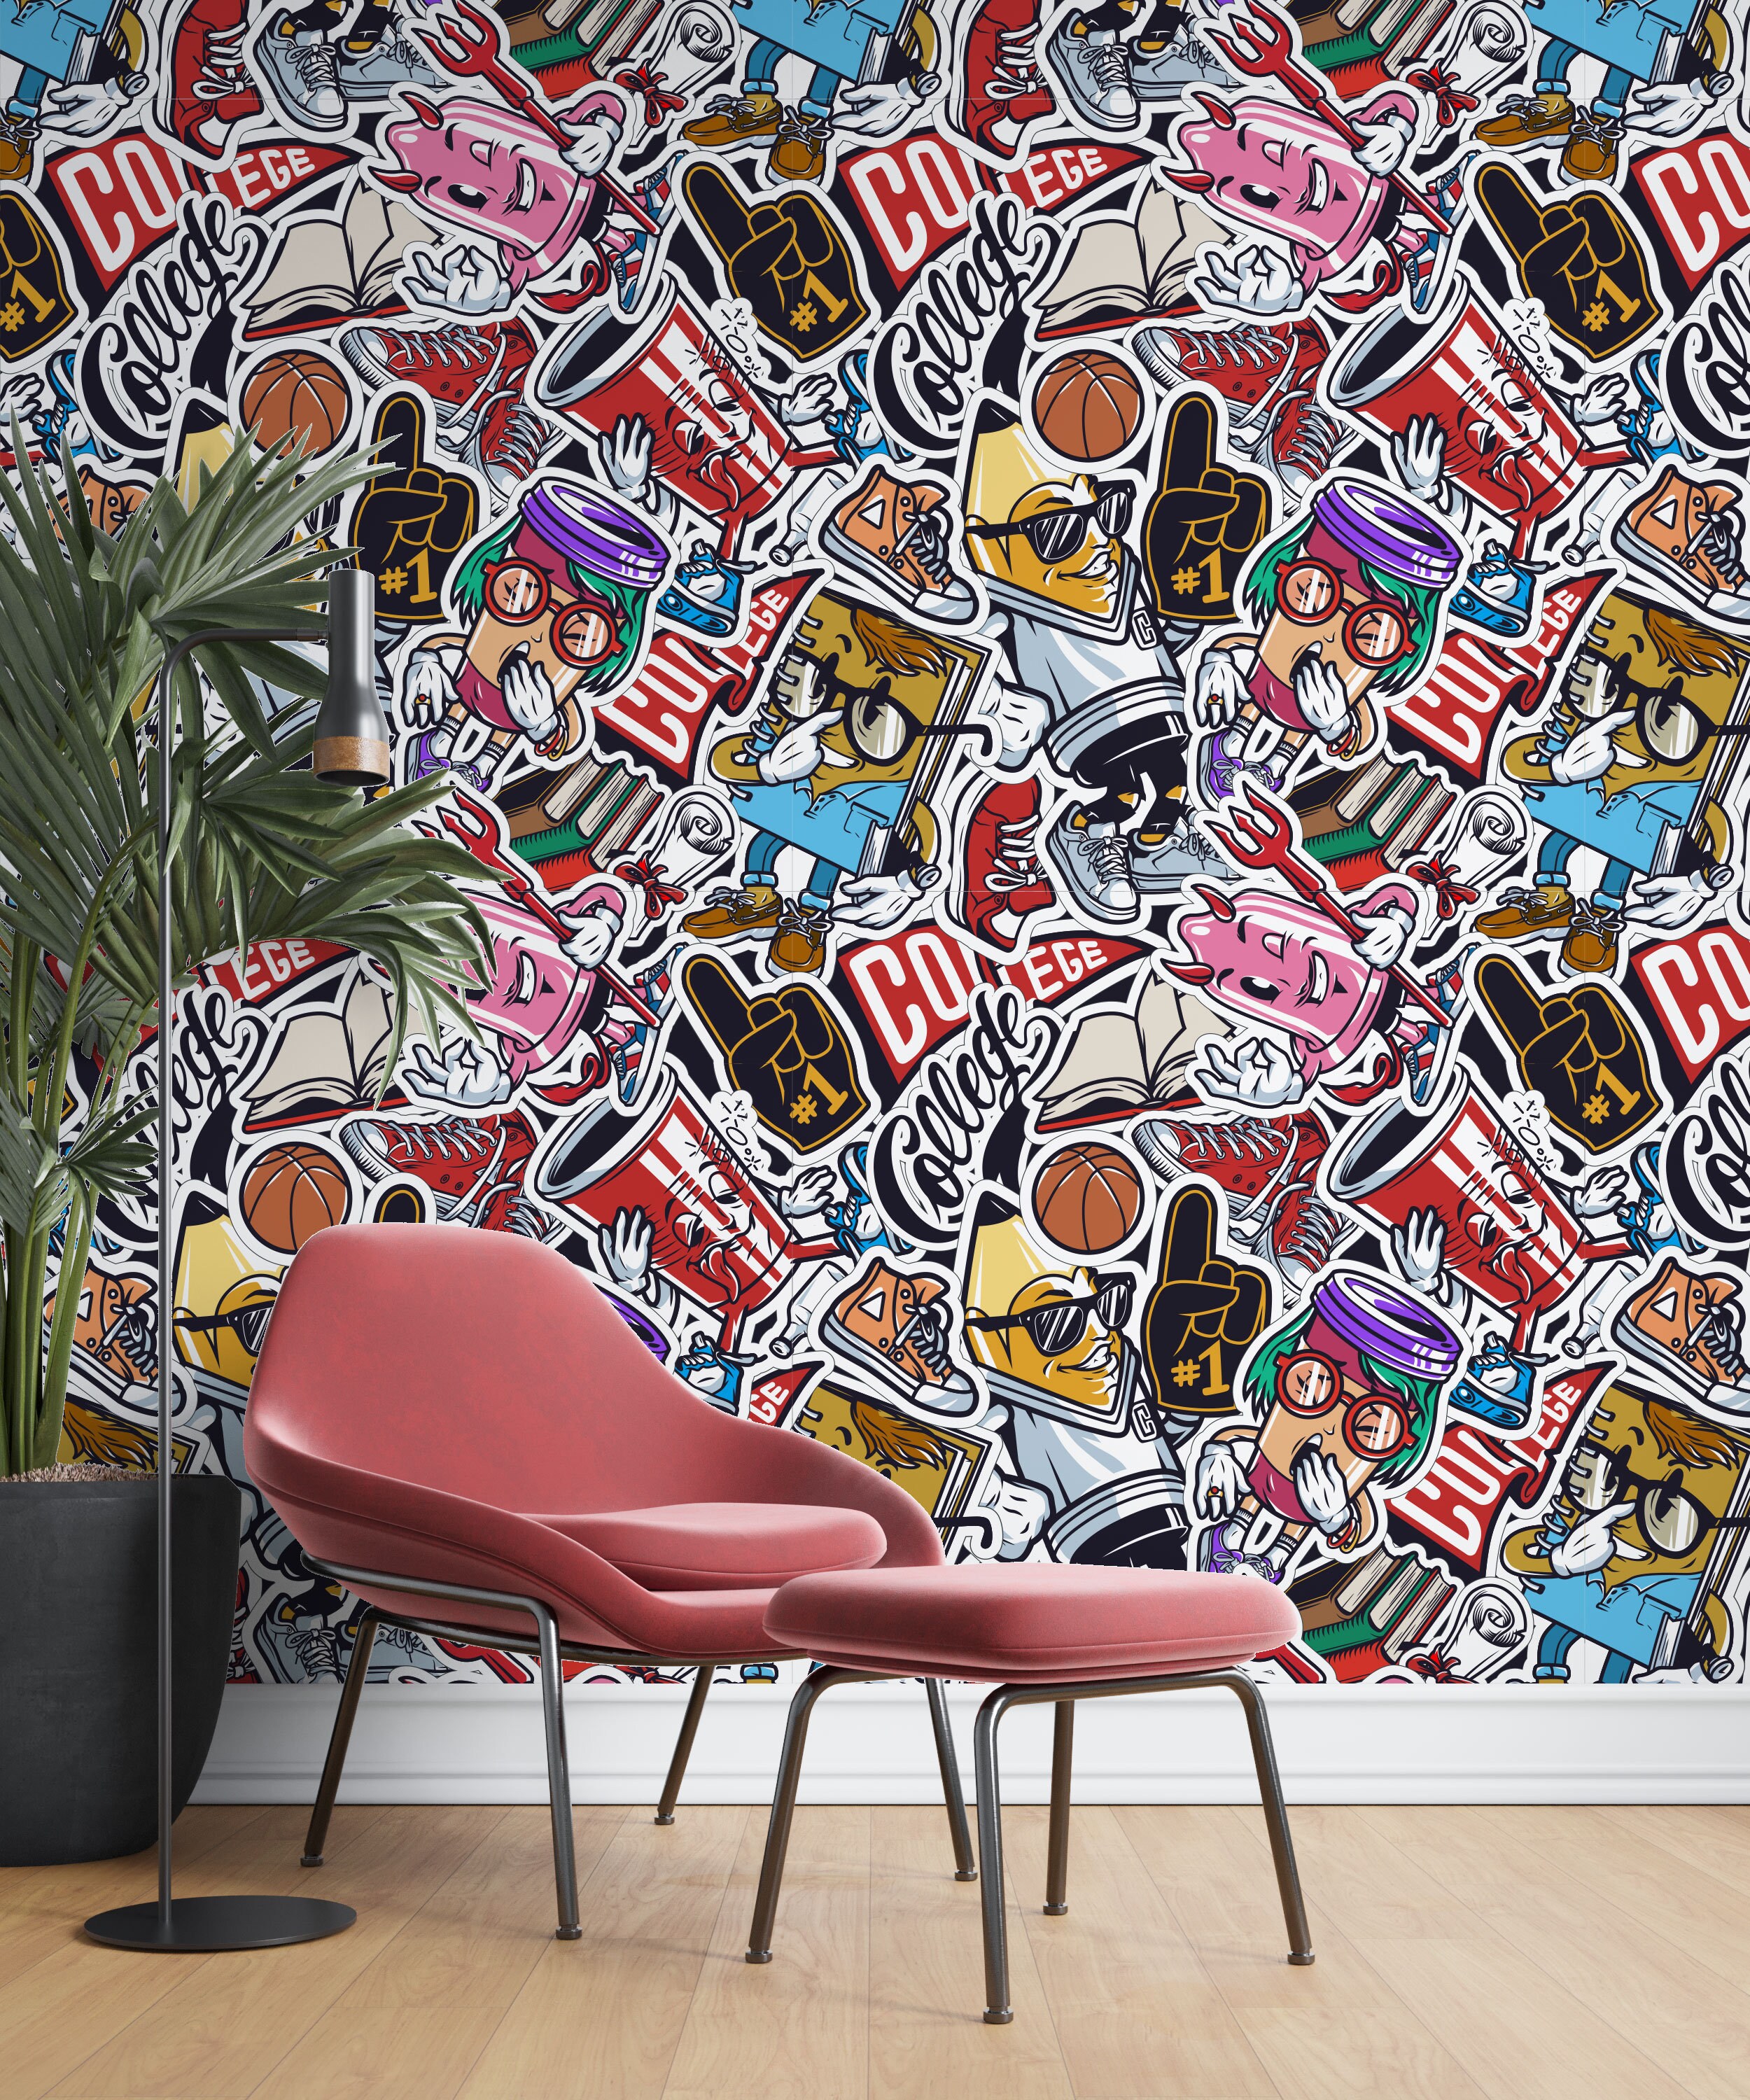 Sticker Bomb Photos Download The BEST Free Sticker Bomb Stock Photos  HD  Images